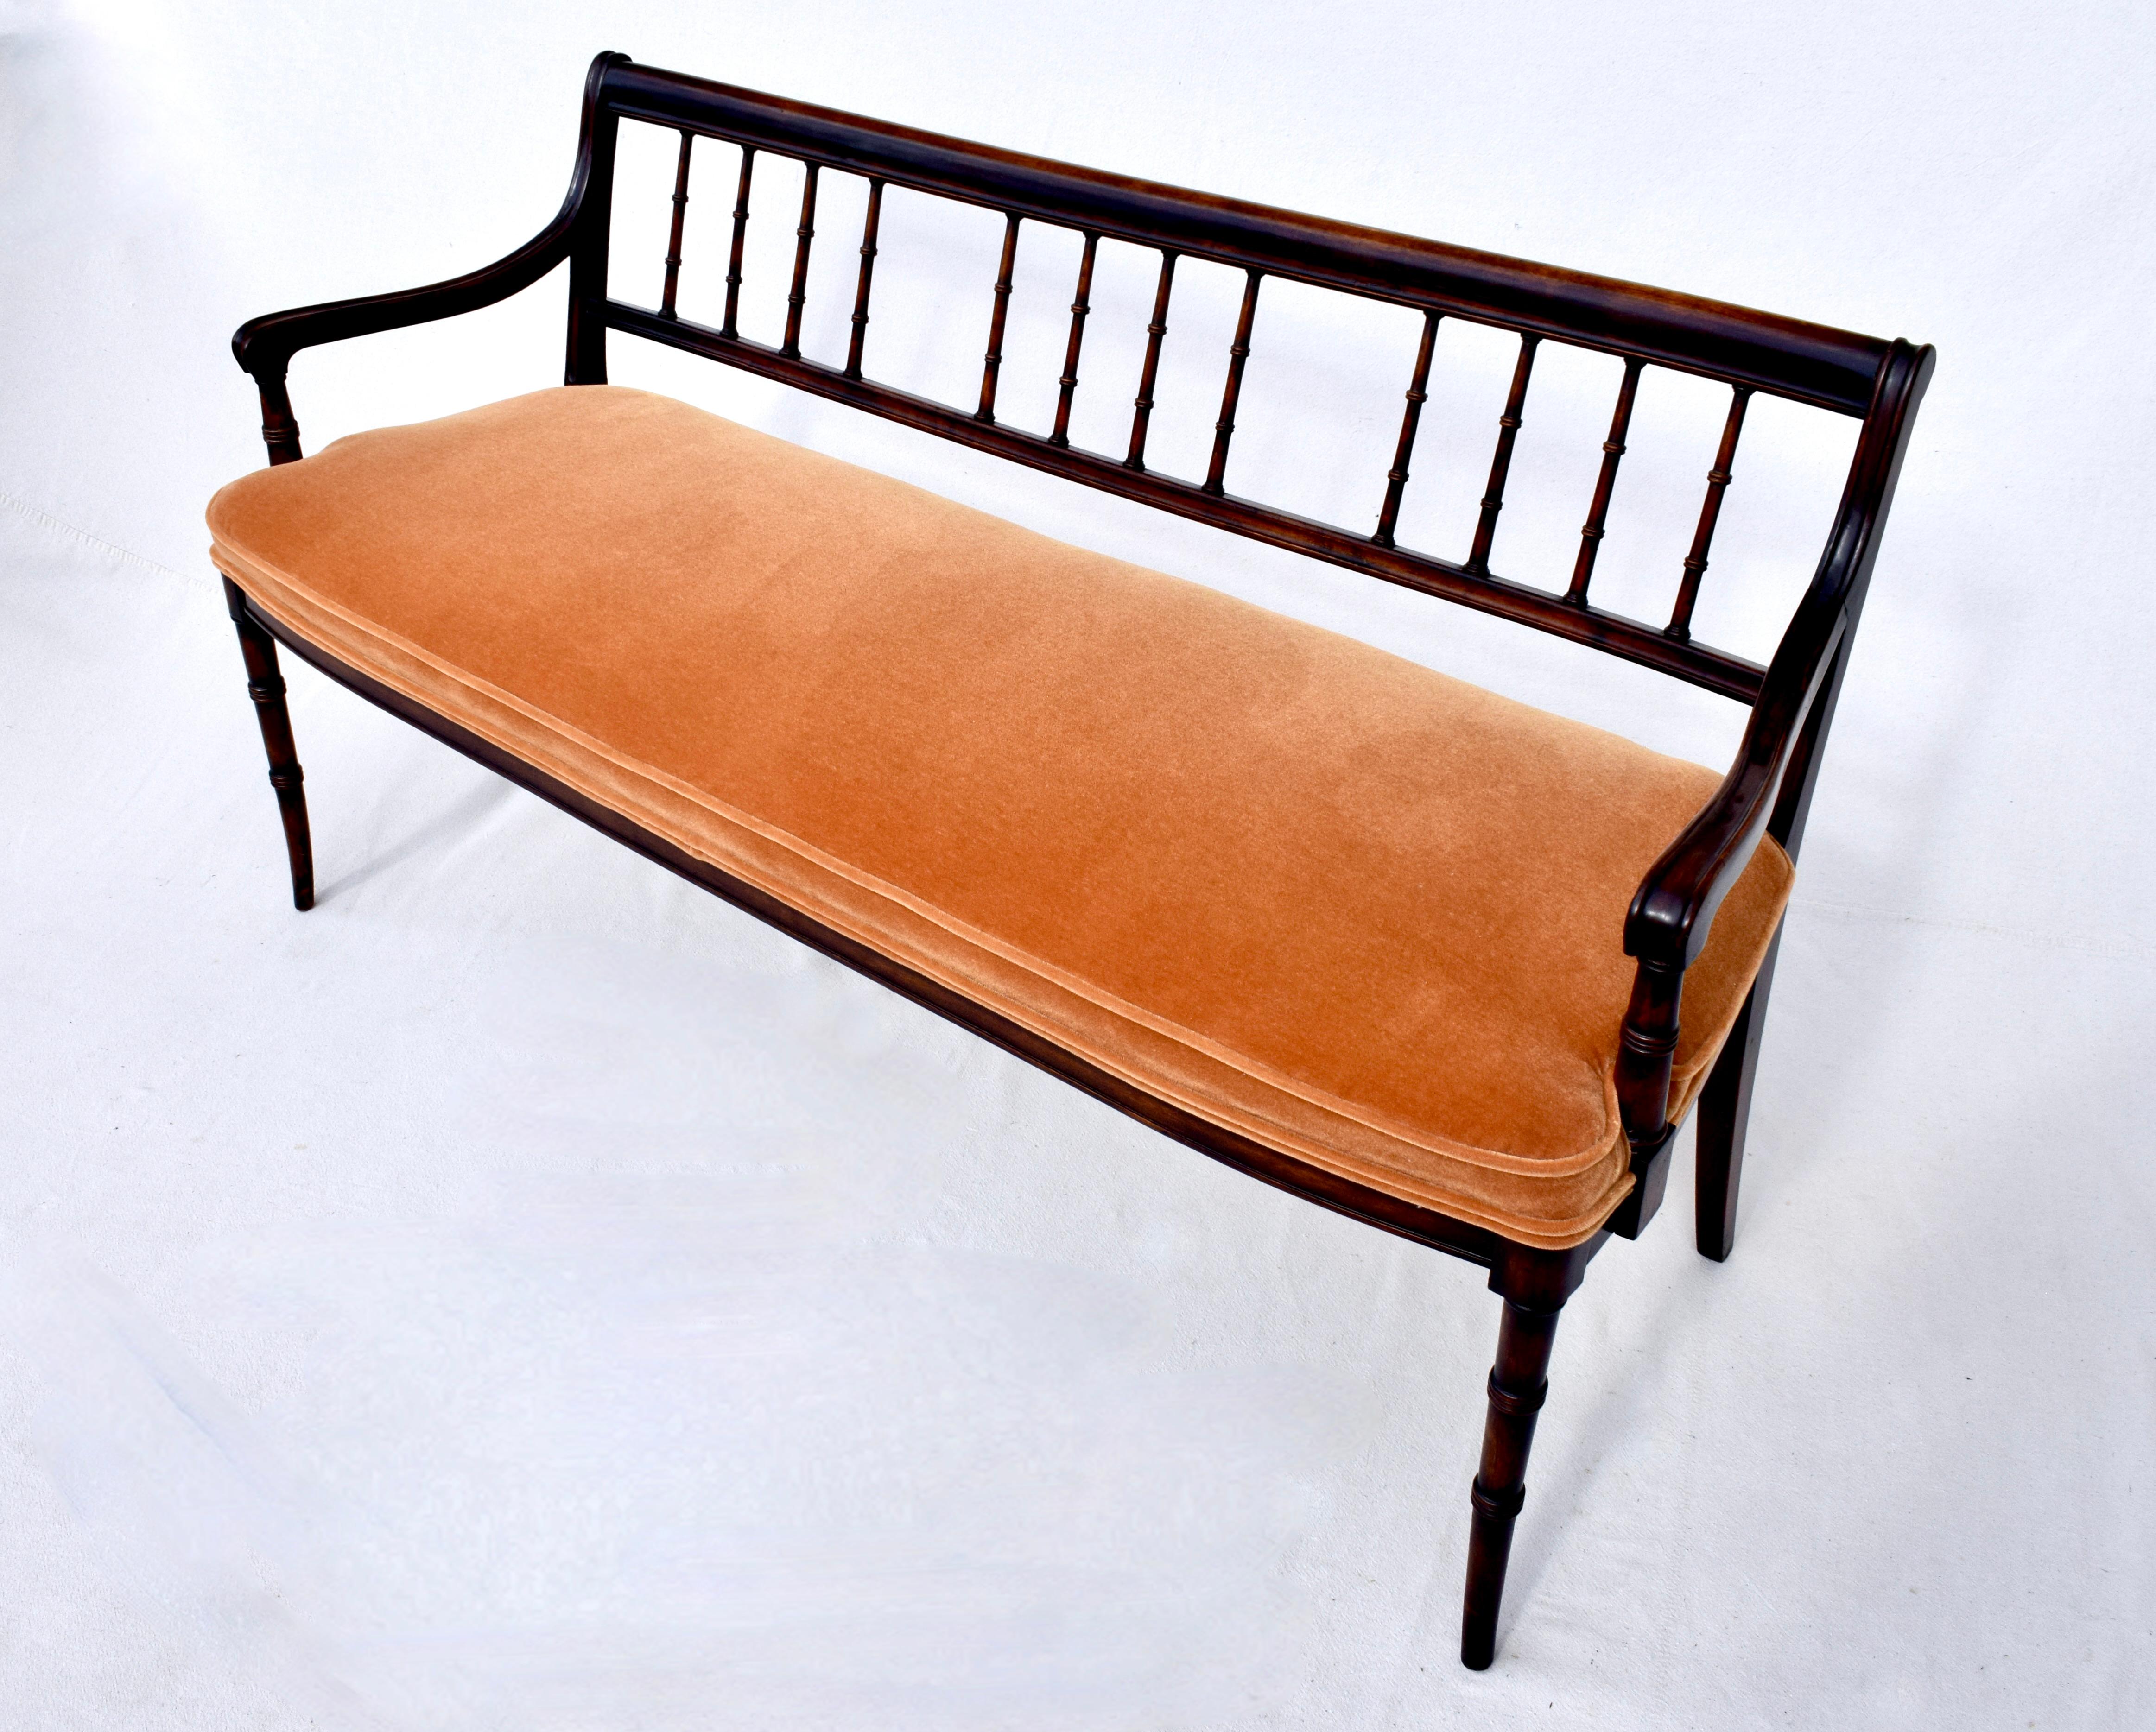 Mahogany open Regency style settee with ever so subtle curved spindle back and faux bamboo saber leg styling. Newly upholstered in plush Amber Mohair of substantial heirloom quality.
Seat 20